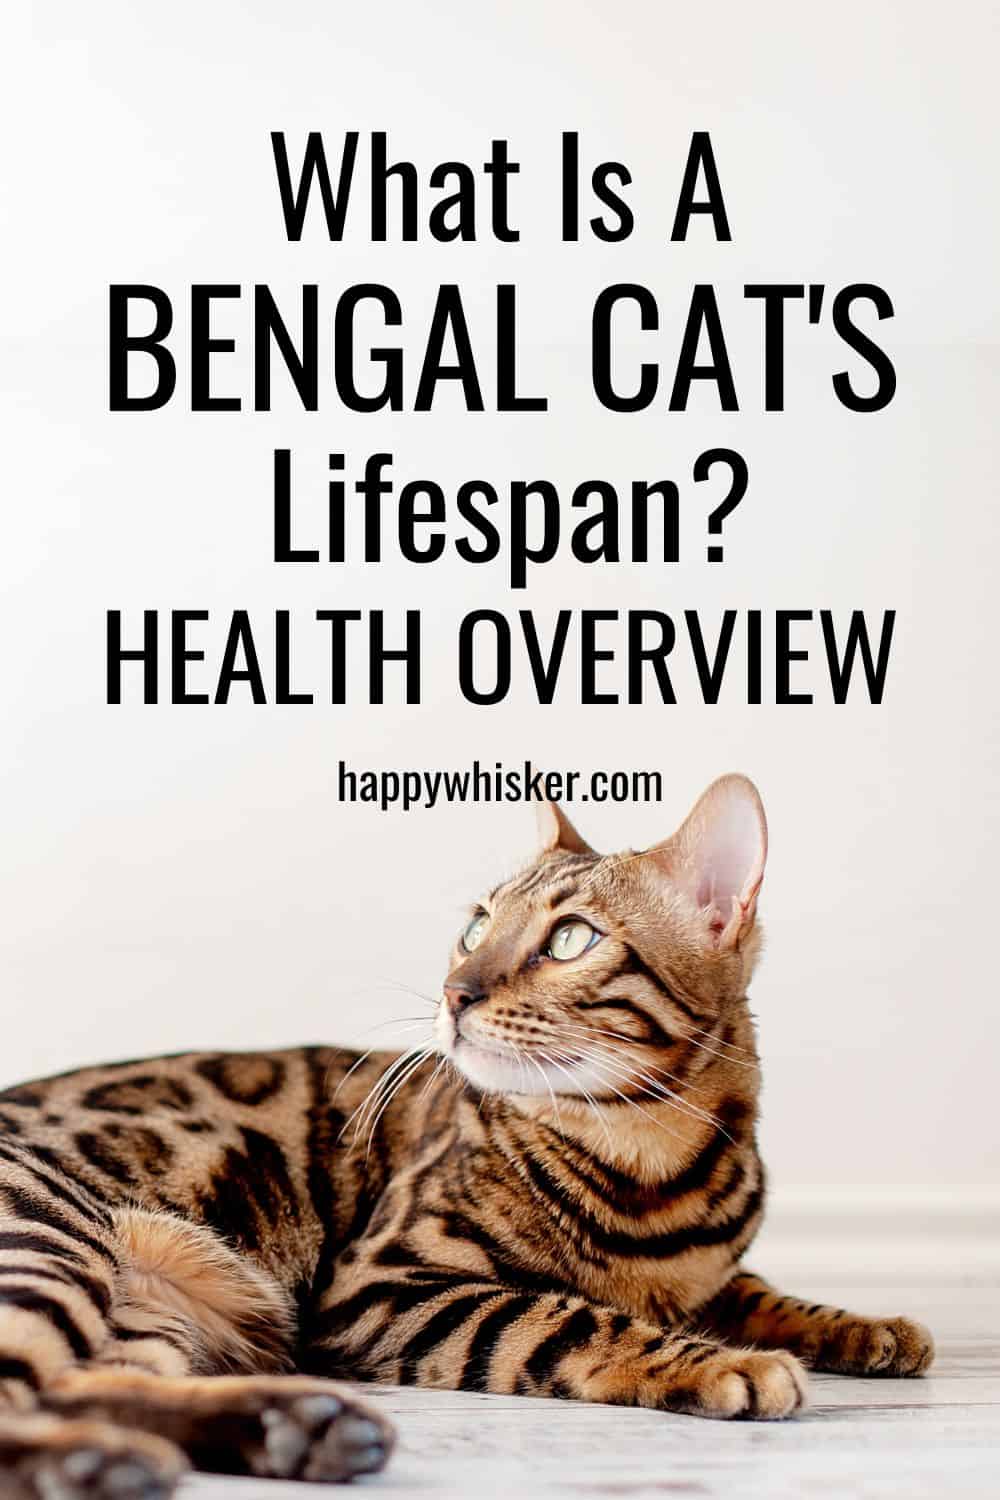 What Is A Bengal Cat's Lifespan Health Overview Pinterest